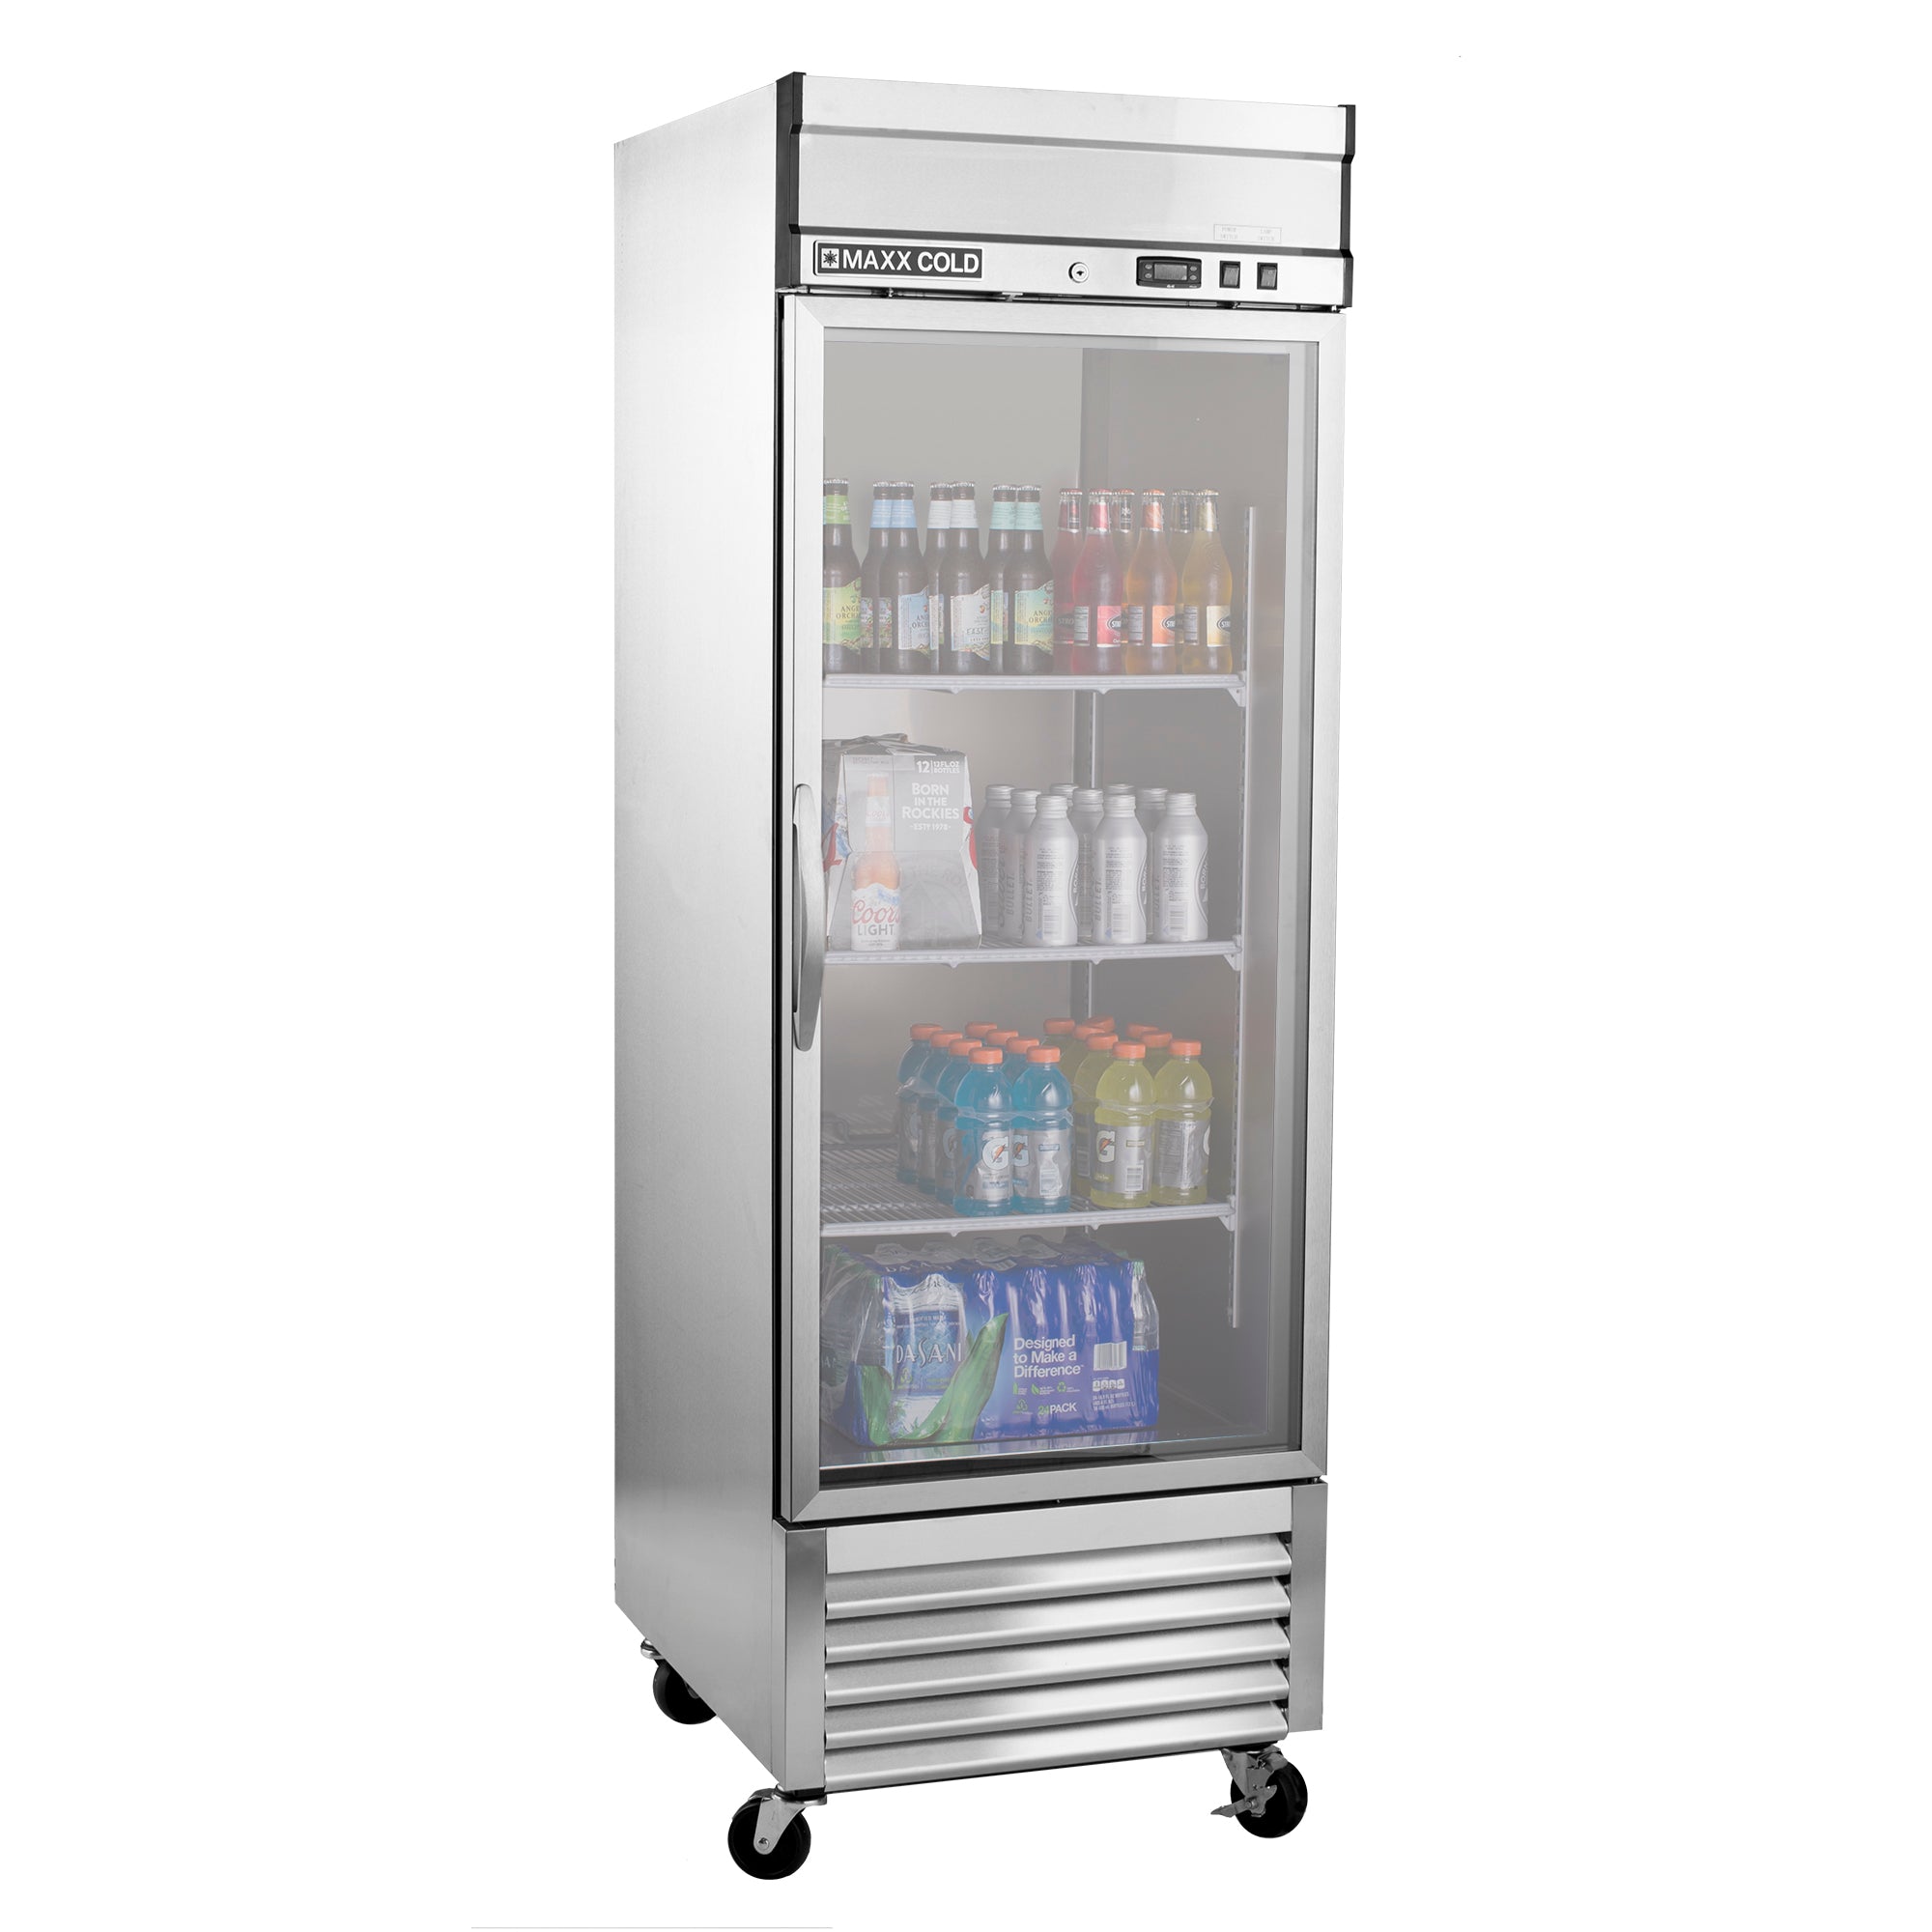 Maxx Cold - MXSR-23GDHC, Maxx Cold Single Glass Door Reach-In Refrigerator, Bottom Mount, 27"W, 23 cu. ft. Storage Capacity, in Stainless Steel